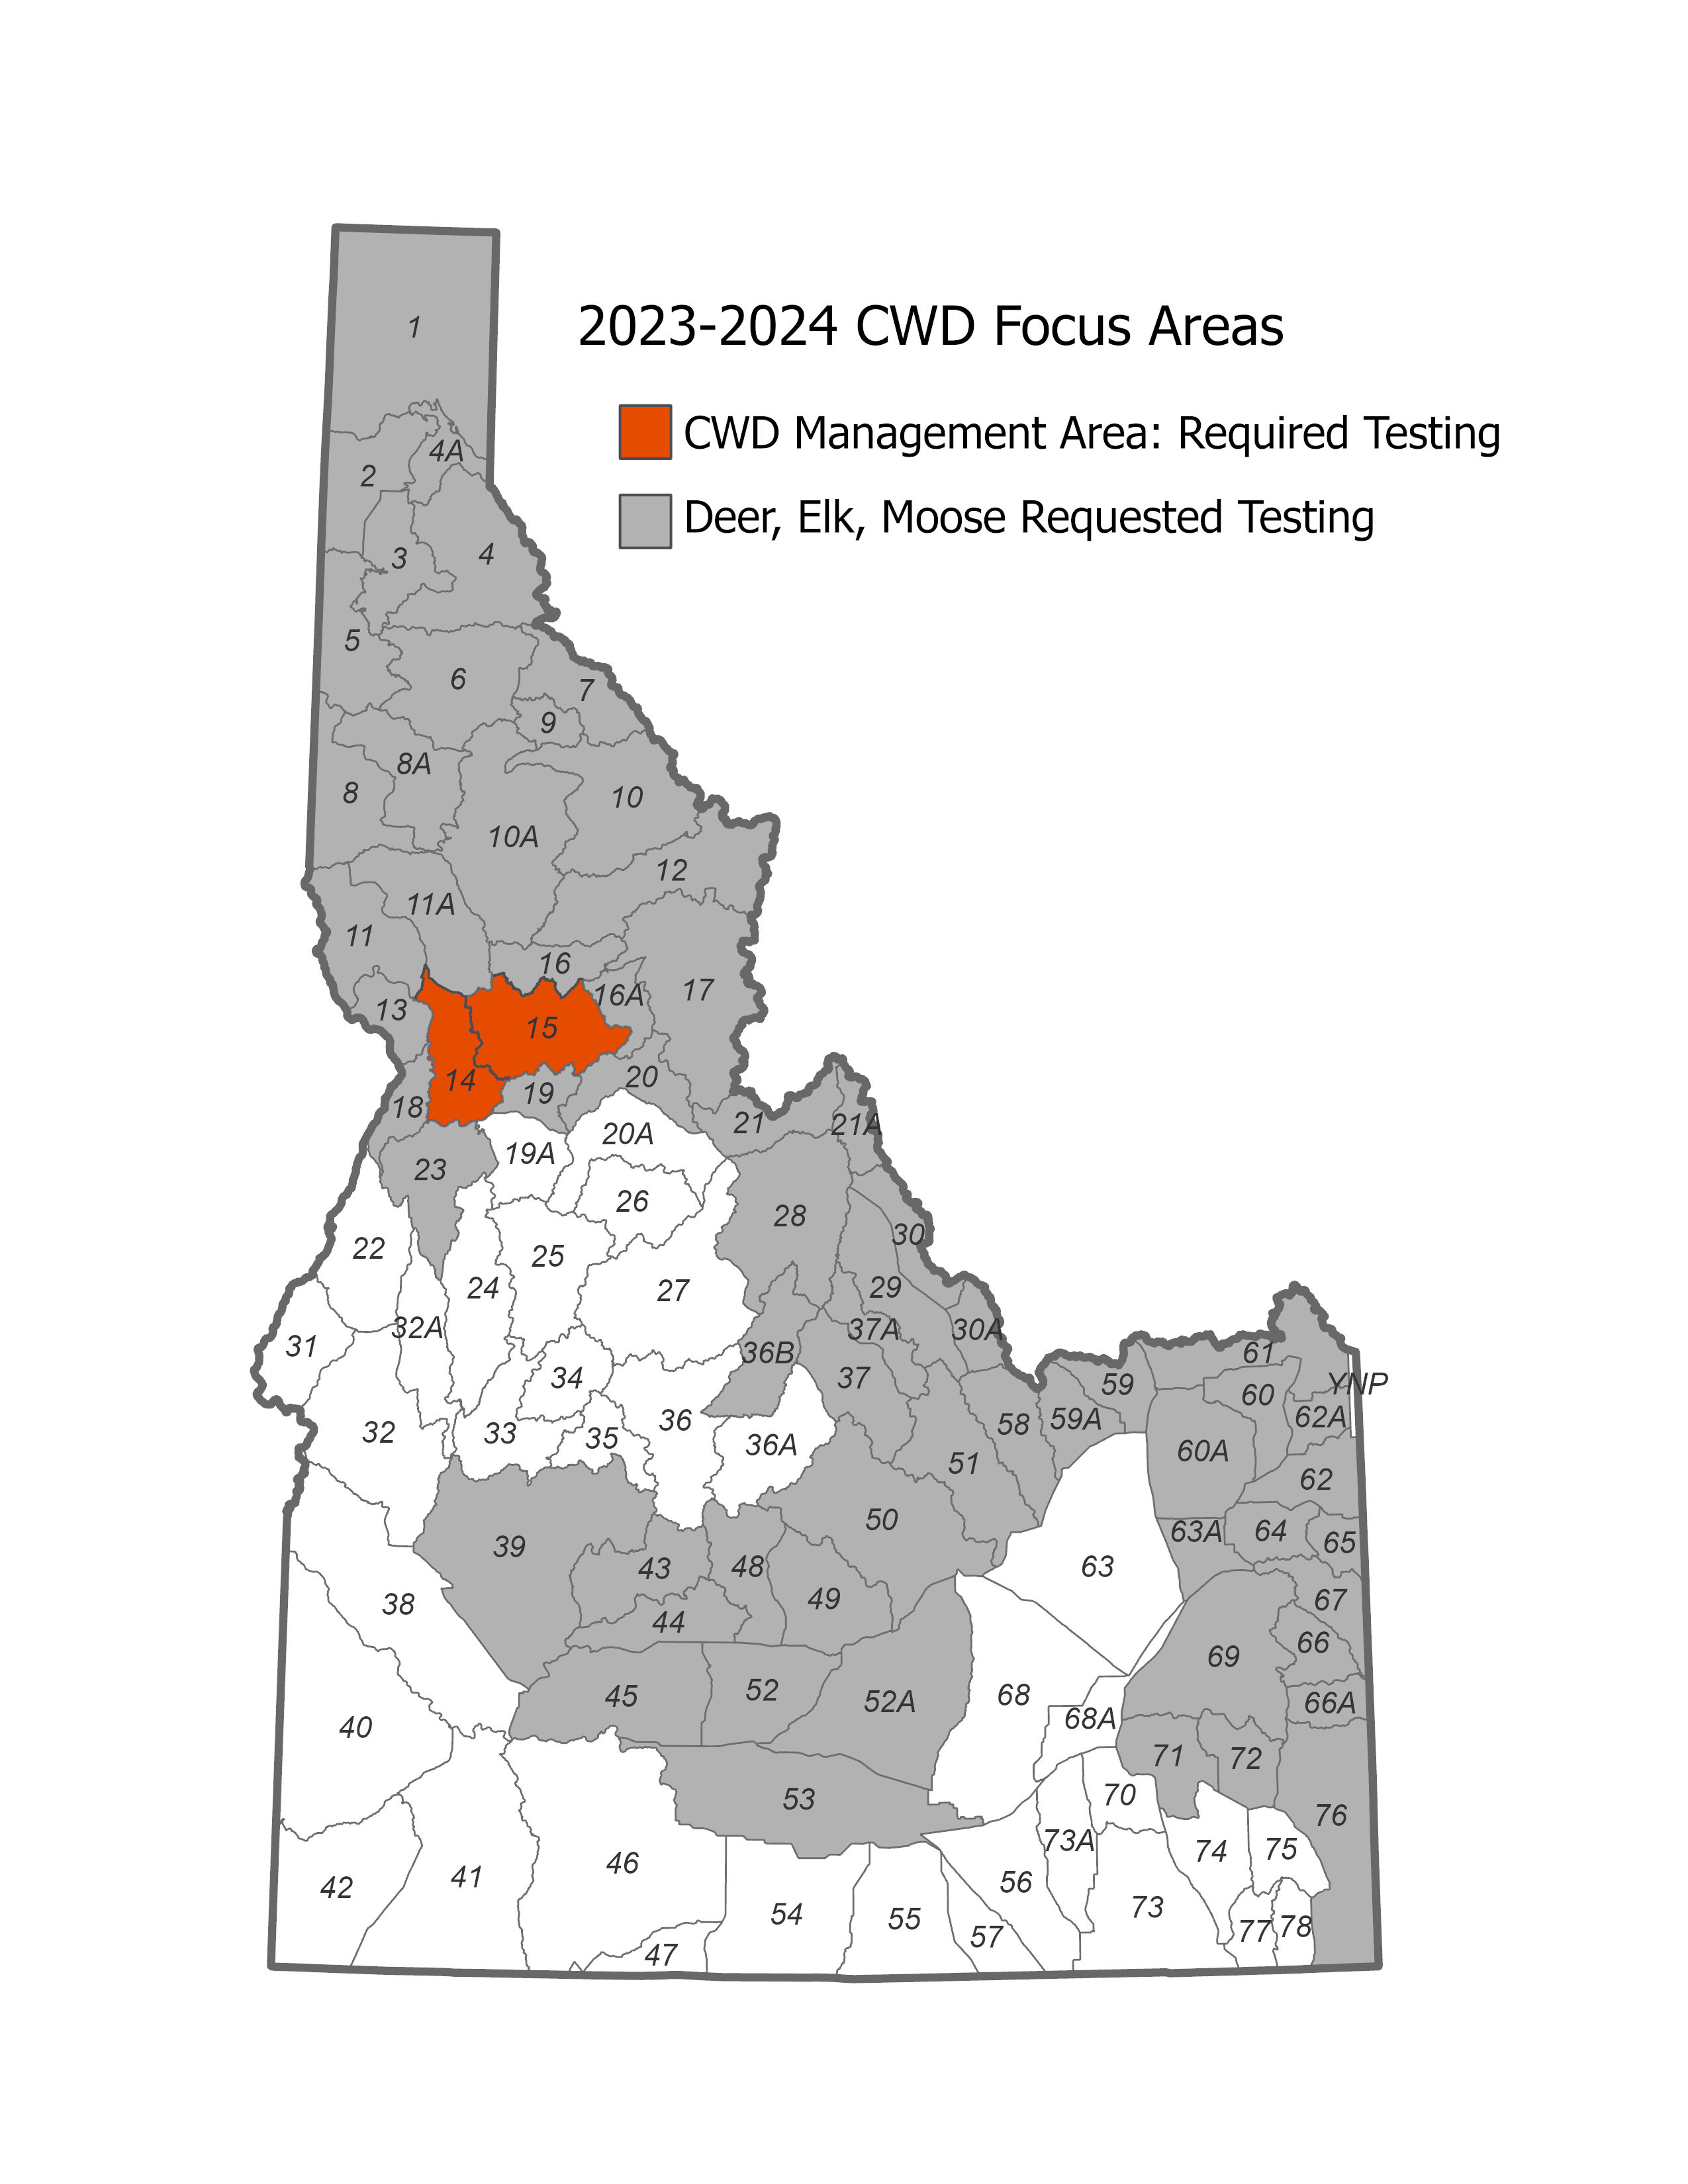 A game unit map of Idaho showing required and requested testing areas